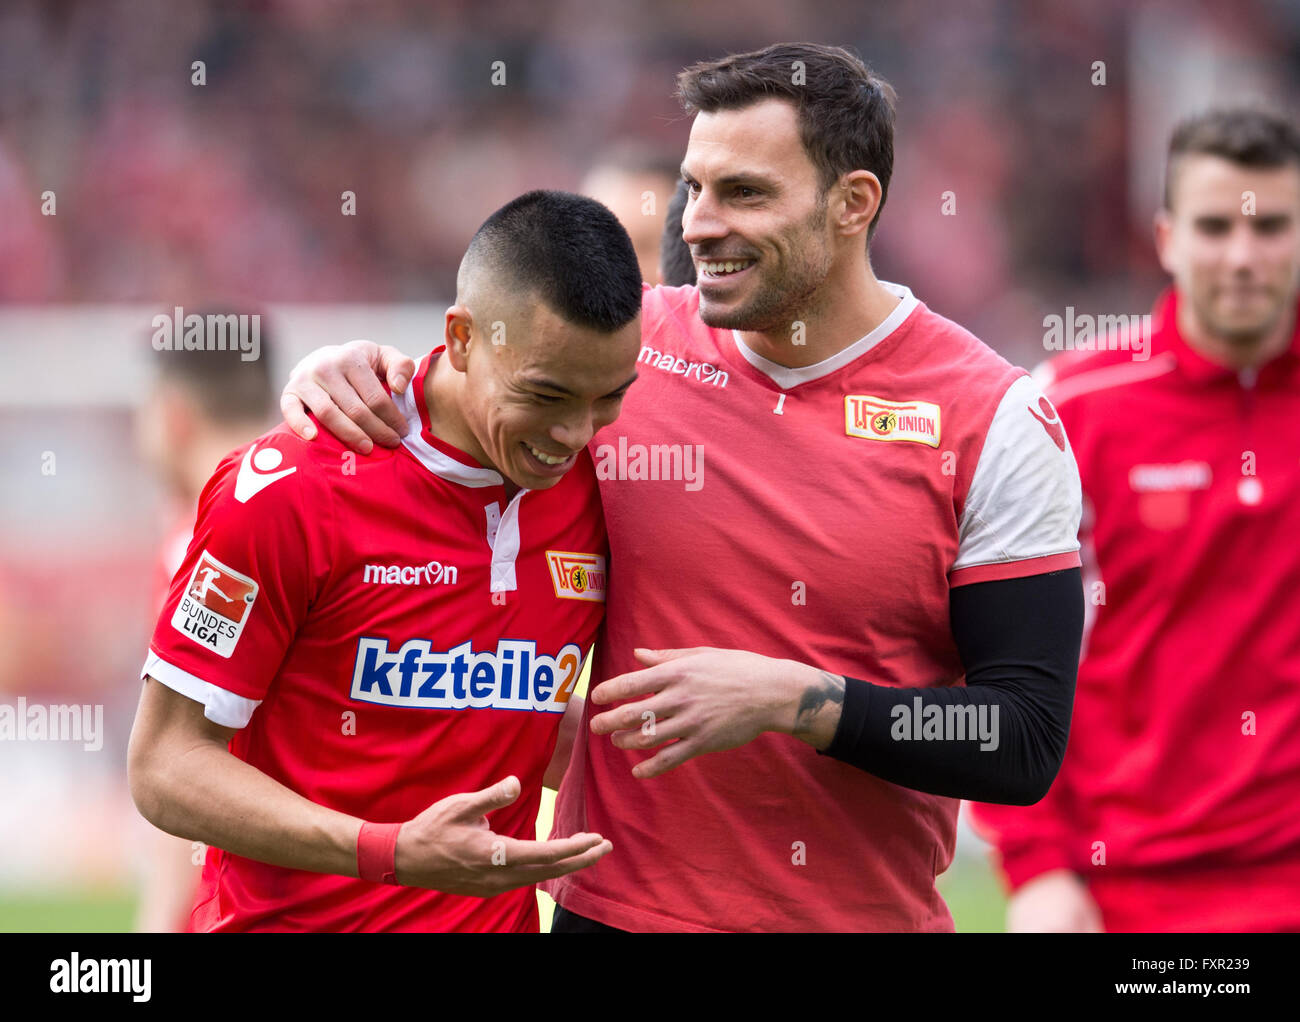 Berlin, Germany. 17th Apr, 2016. Berlin's goalkeeper Daniel Haas (2-R) embraces teammate and goalscorer Bobby Wood (L) after the German second division Bundesliga soccer match between FC Union Berlin and FC Heidenheim in Berlin, Germany, 17 April 2016. Photo: ANNEGRET HILSE/dpa/Alamy Live News Stock Photo